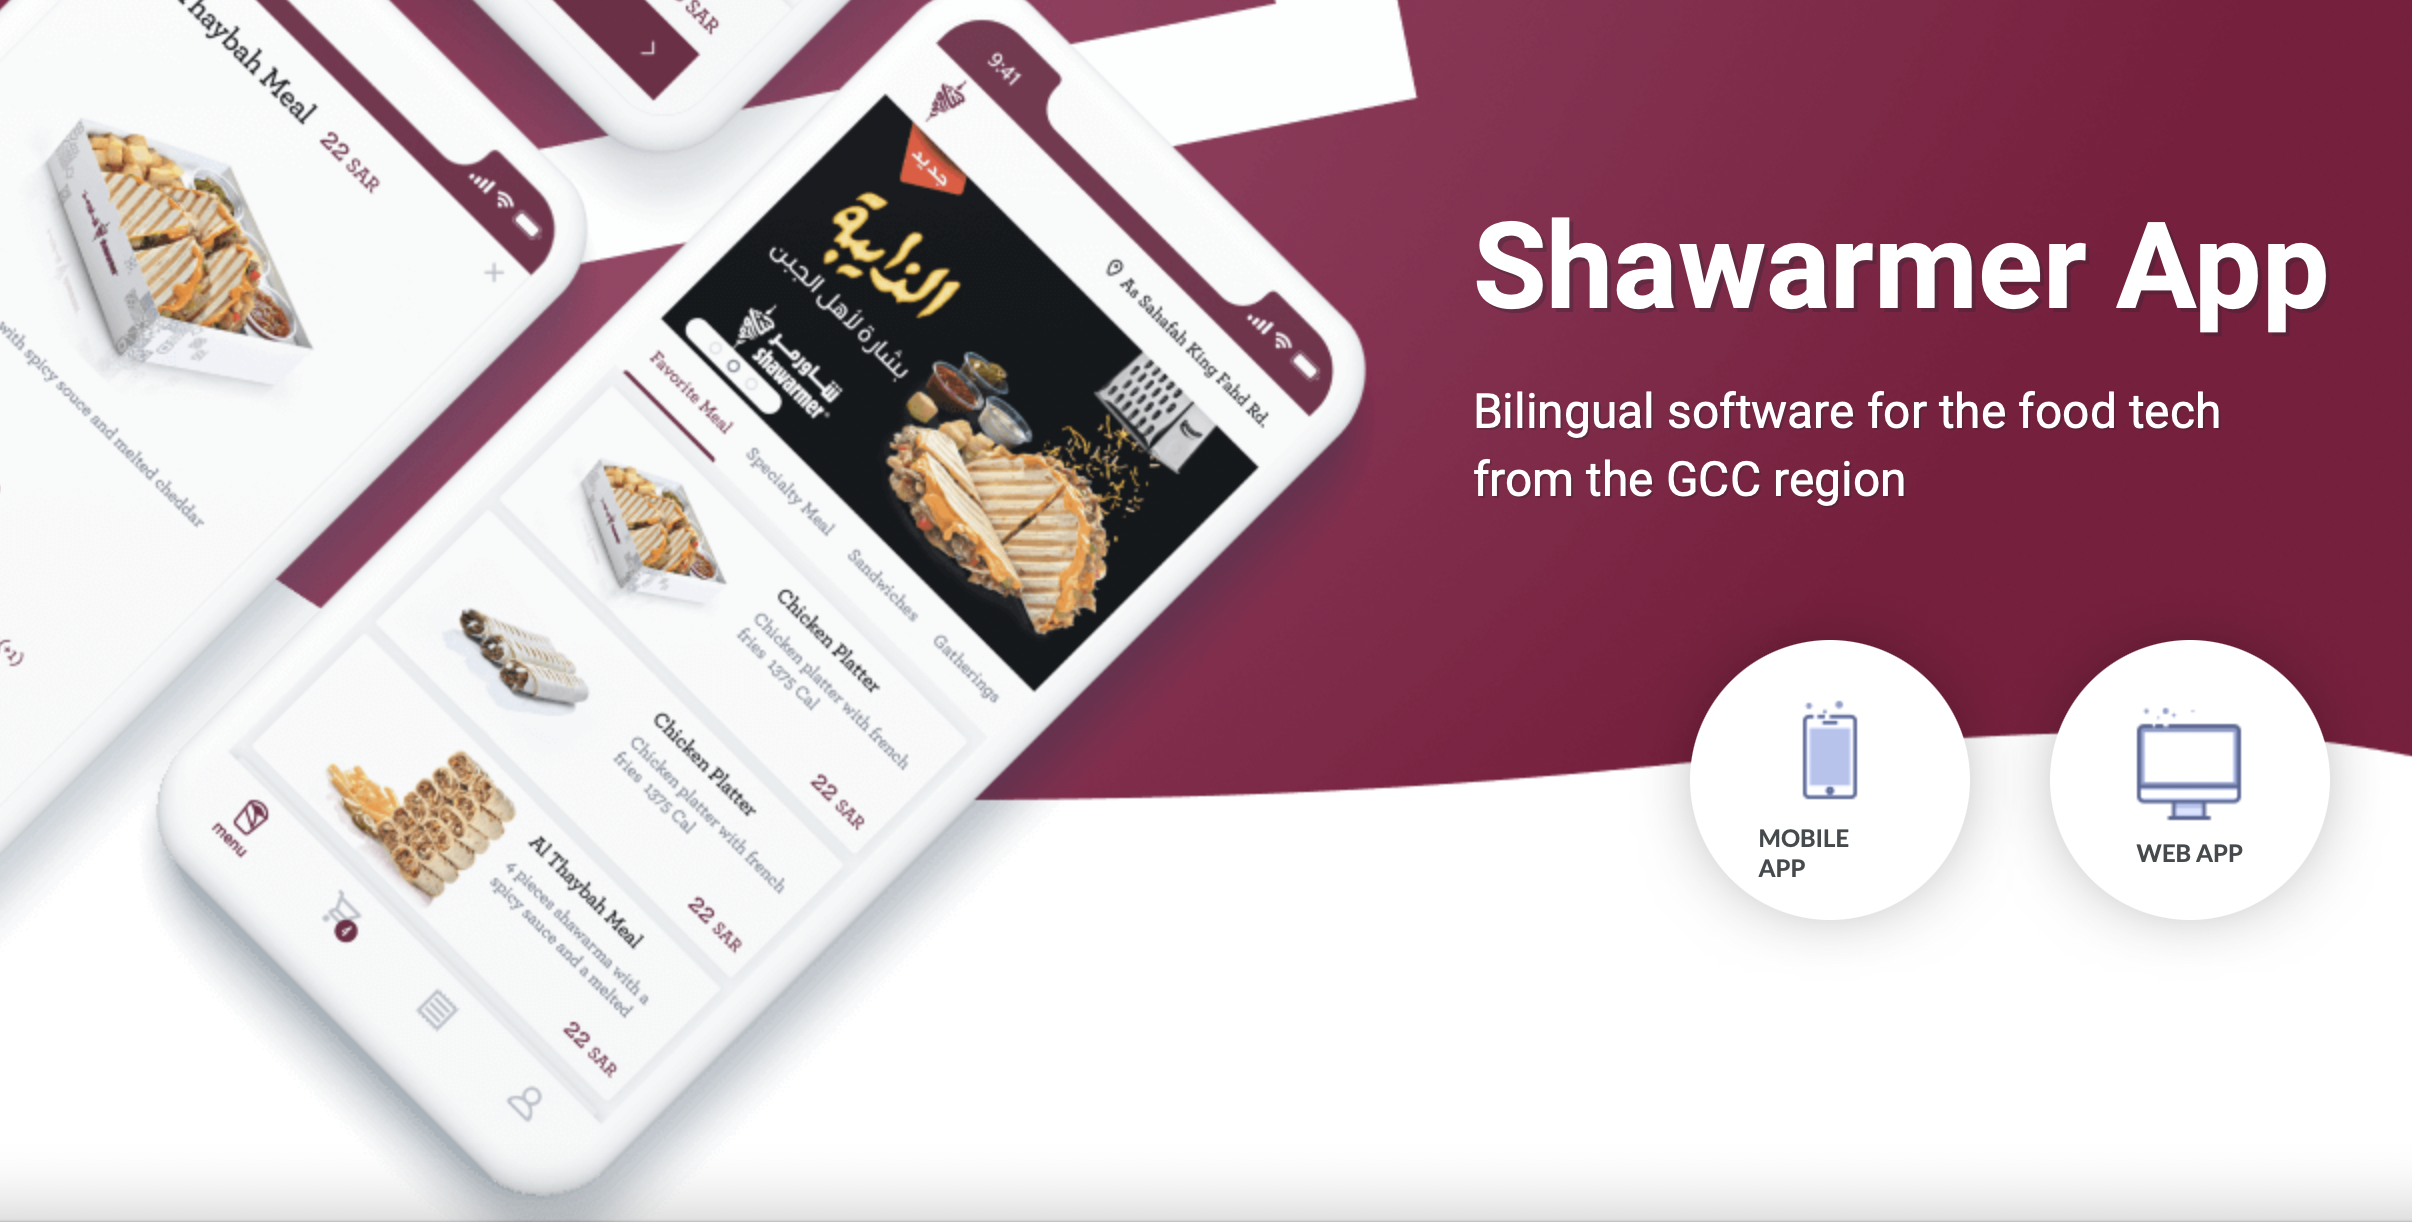 Bilingual software for the food tech  from the GCC region